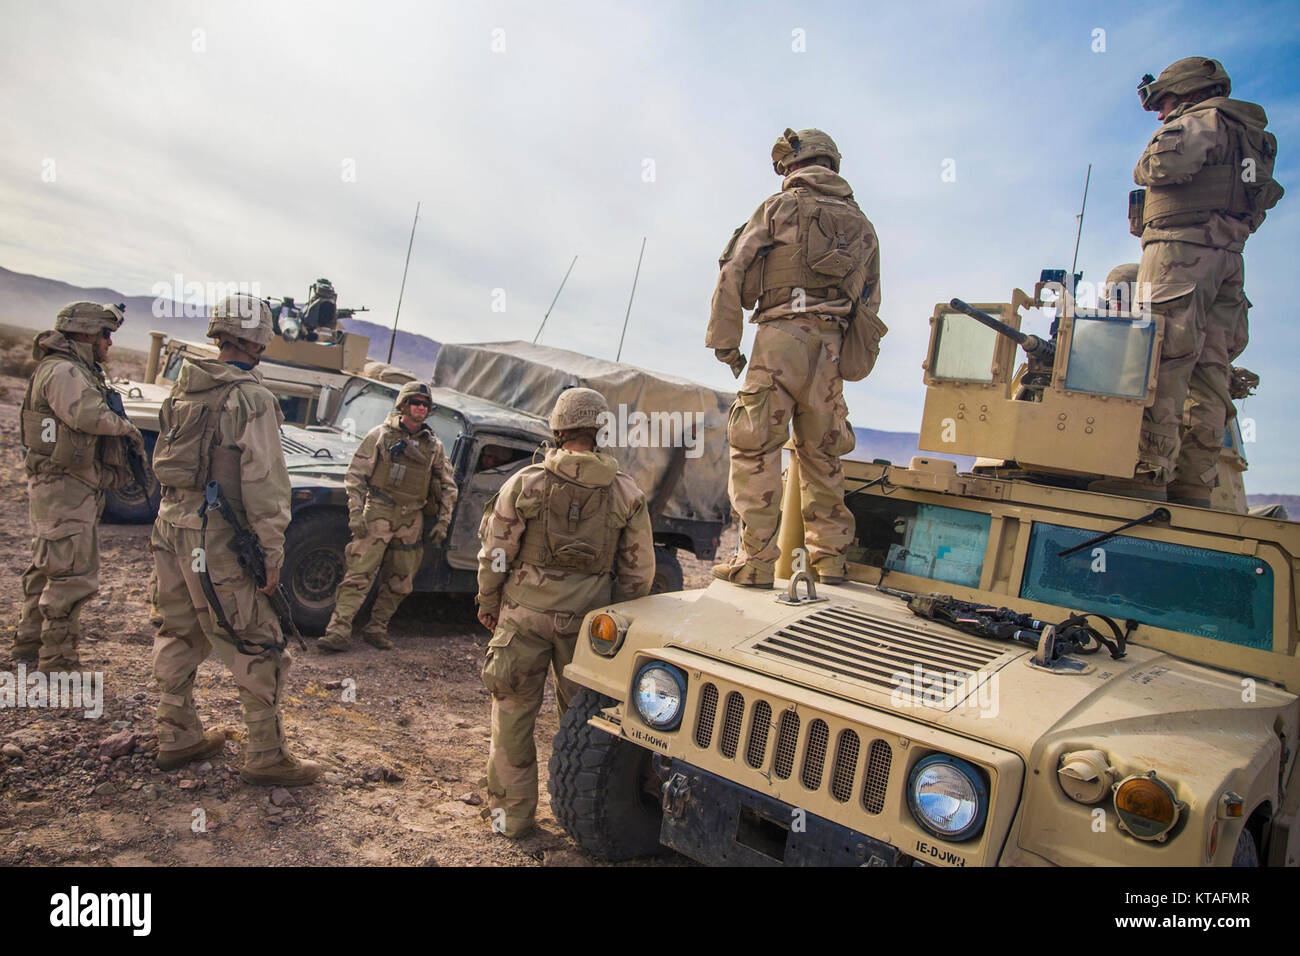 U.S. Marine Corps Sgt. Maj. William T. Sowers, center left, the Sgt. Maj. of 1st Marine Division, talks with Marines with TOW Platoon, 1st Tank Battalion, during a battle field circulation at Marine Corps Air Ground Combat Center, Twentynine Palms, Calif., Dec. 10, 2017. Foster accompanied U.S. Marine Corps Maj. Gen. Eric M. Smith, the commanding general for 1st Marine Division, as he visited various units participating in exercise Steel Knight 2018. (U.S. Marines Corps Stock Photo